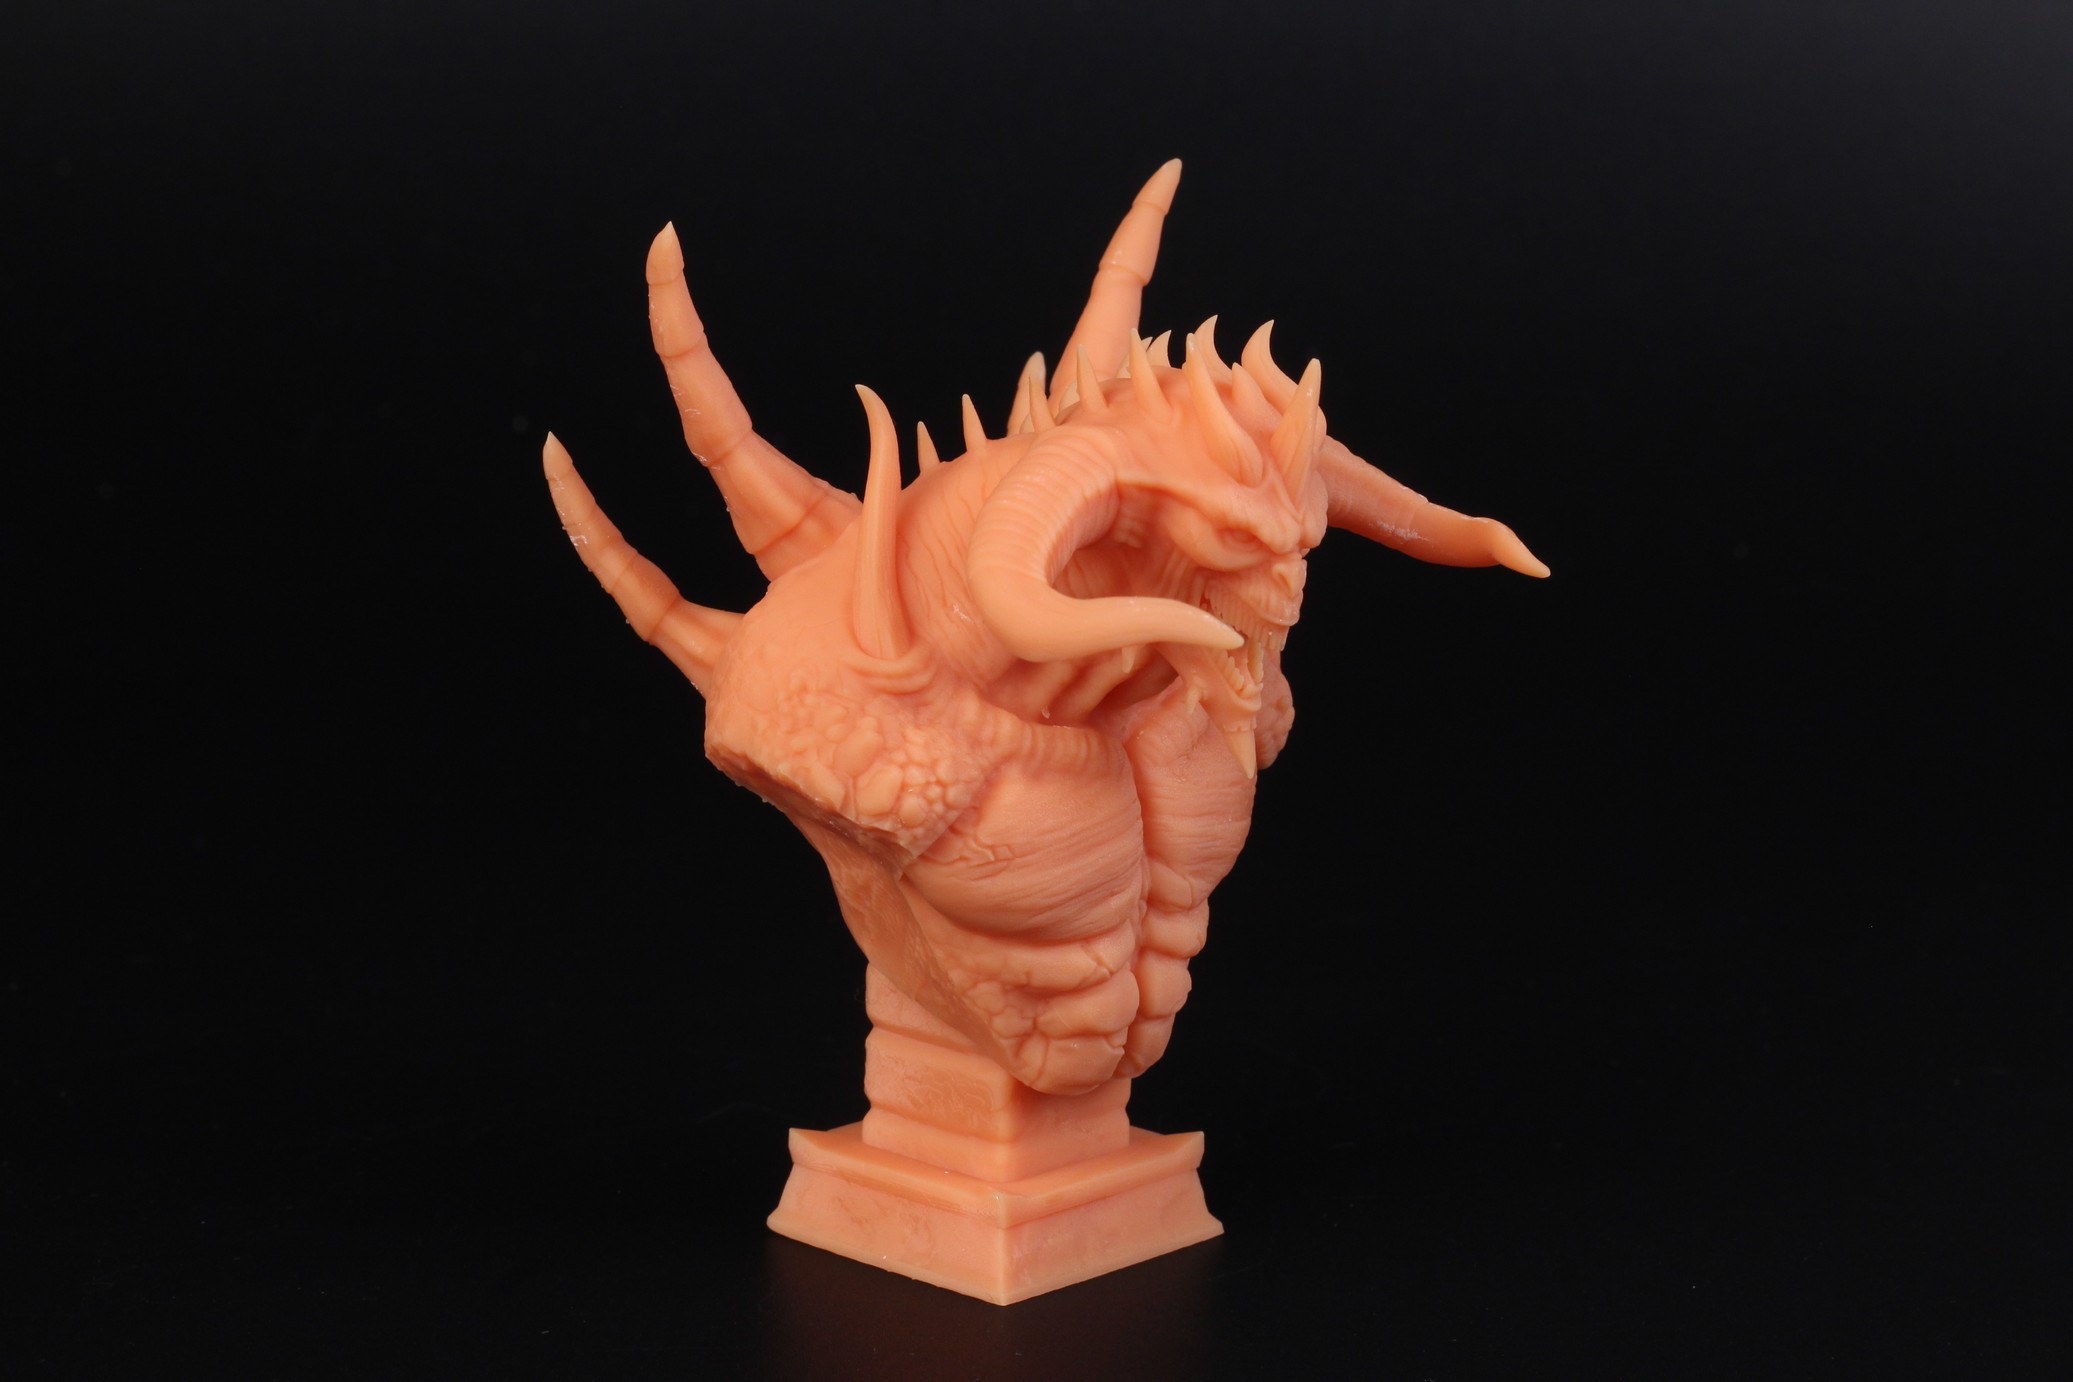 Diablo Bust printed on Anycubic Photon M3 Max 3 | Anycubic Photon M3 Max Review: Who Needs FDM Anymore?